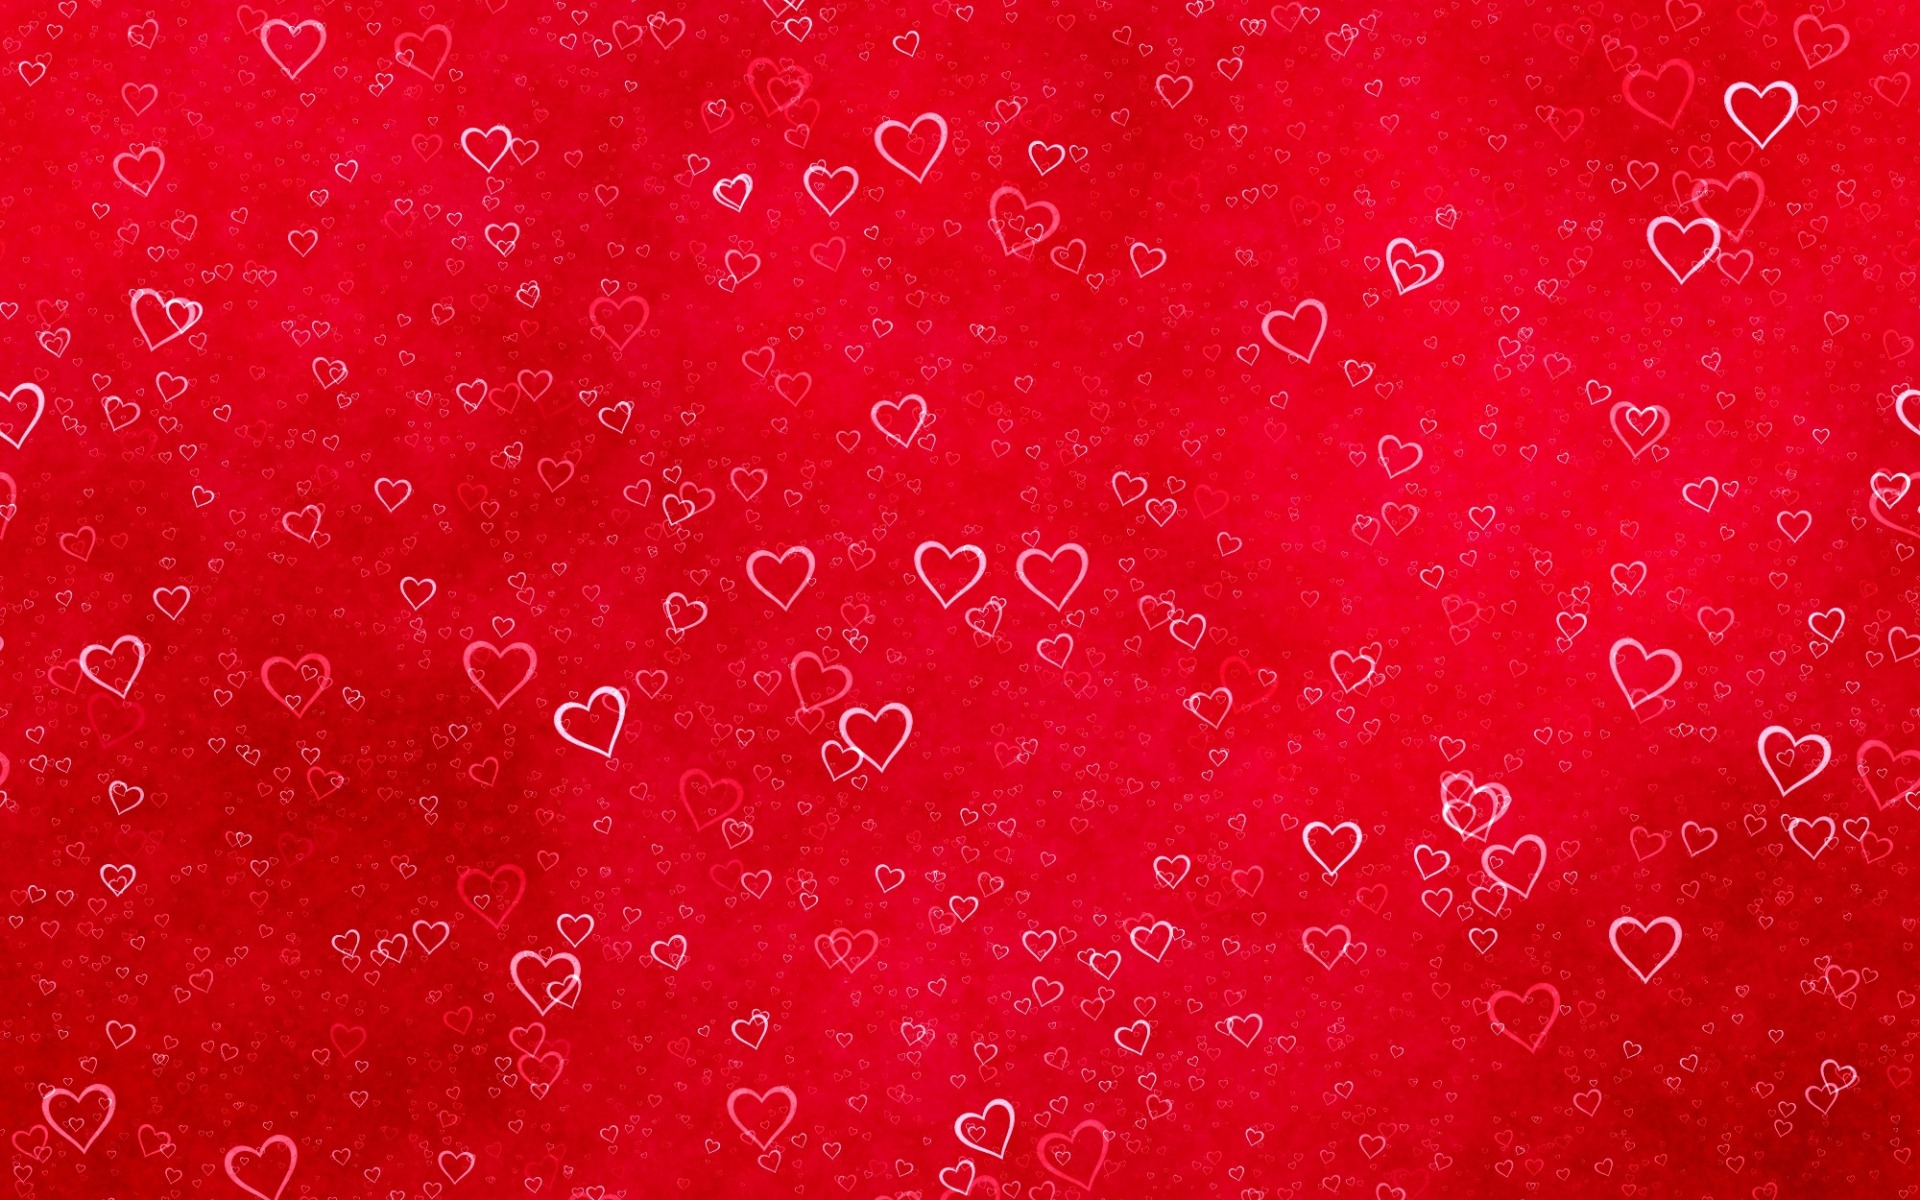 Download wallpapers red background with hearts, love concepts, heart,  romance for desktop with resolution 1920x1200. High Quality HD pictures  wallpapers